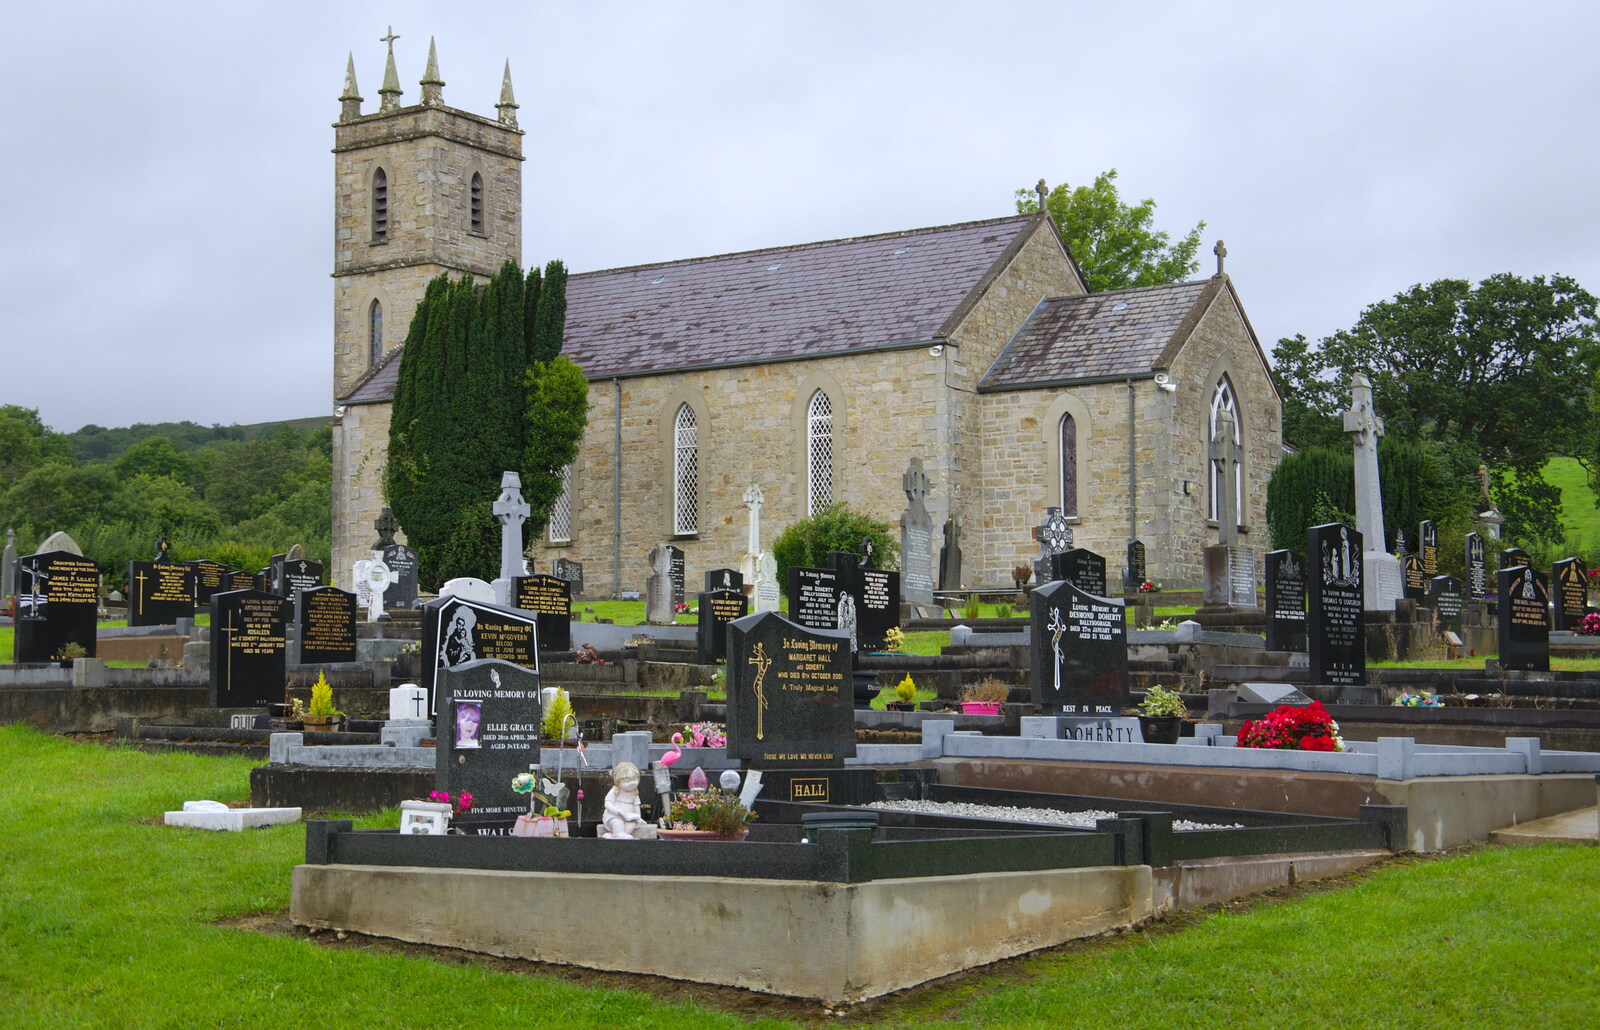 Mullaghdun graveyard and church in Cleenish from Travels in the Borderlands: An Blaic/Blacklion to Belcoo and back, Cavan and Fermanagh, Ireland - 22nd August 2019